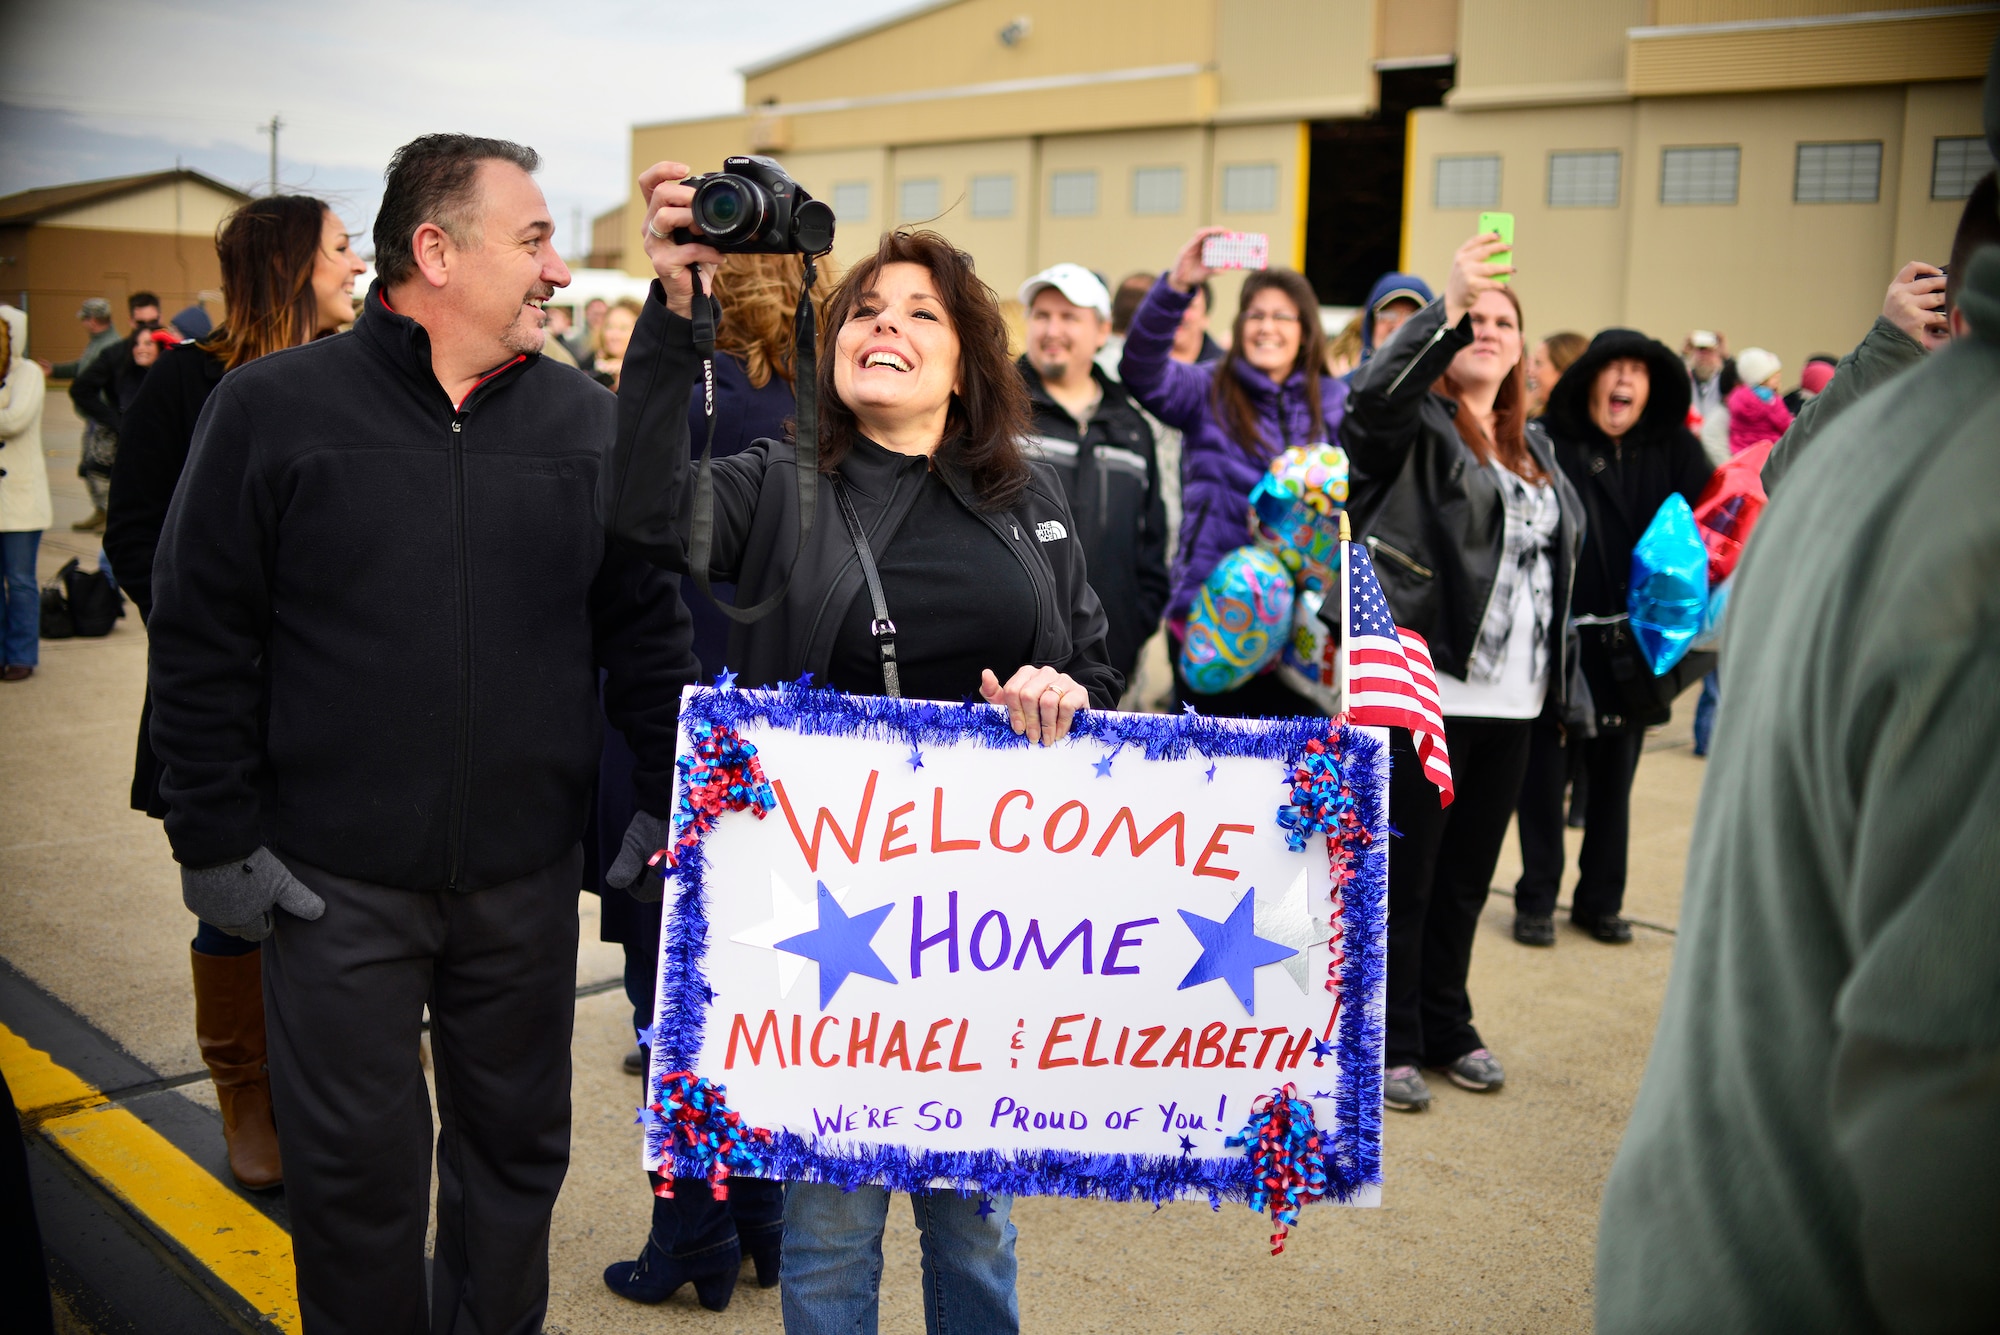 Family members of the 30th Aerial Port Squadron wait for the unit to return home Dec. 6, 2014 at Niagara Falls Air Reserve Station, N.Y. 35 personnel from the base were sent to a deployment in Afghanistan. (U.S. Air Force Photo by Staff Sgt. Stephanie Sawyer)